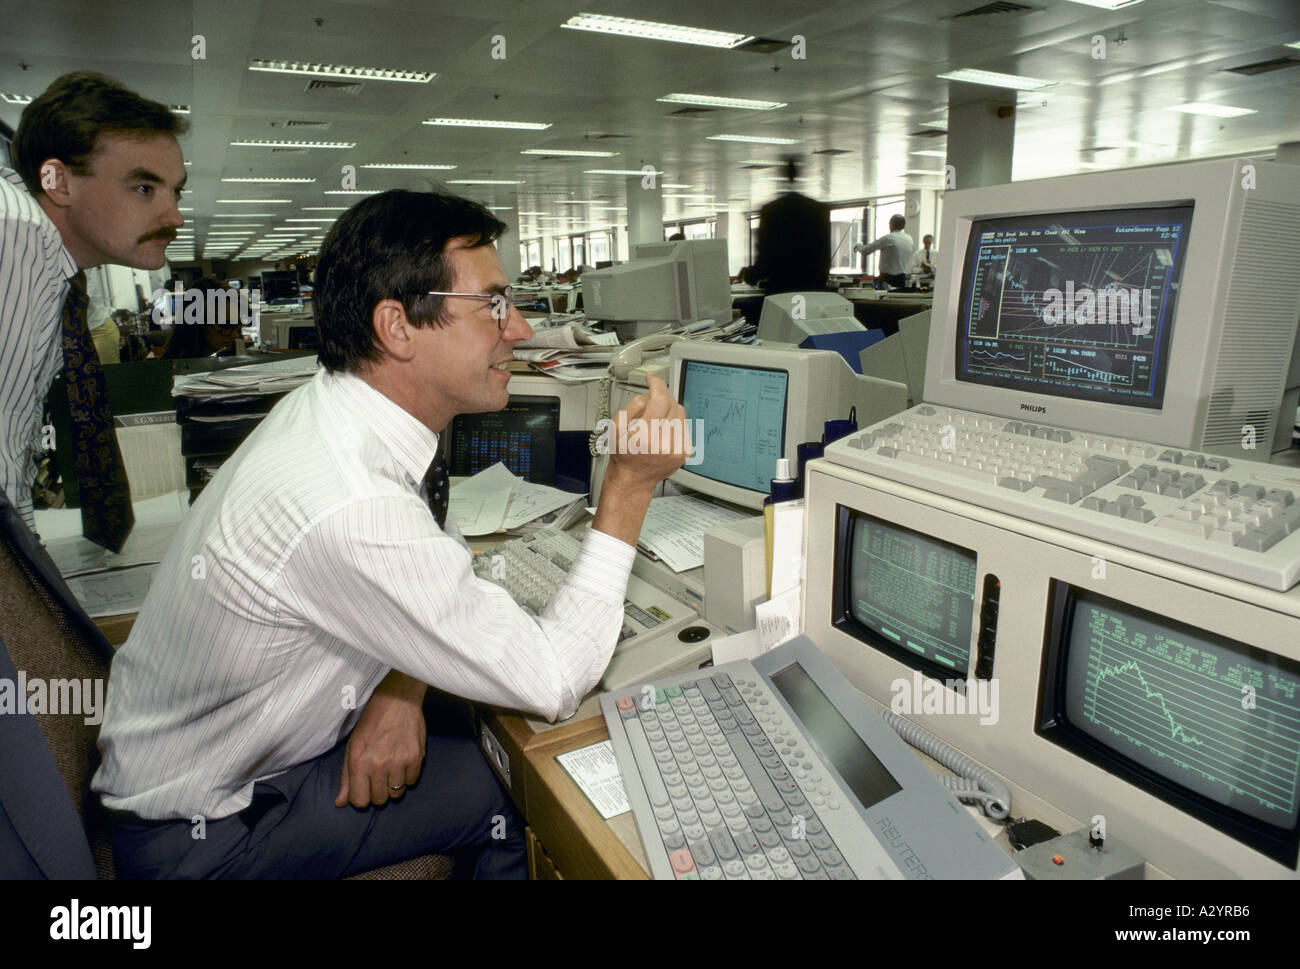 equity share dealing desk at warburgs Merchant bank in the City of London in the 1980s Stock Photo